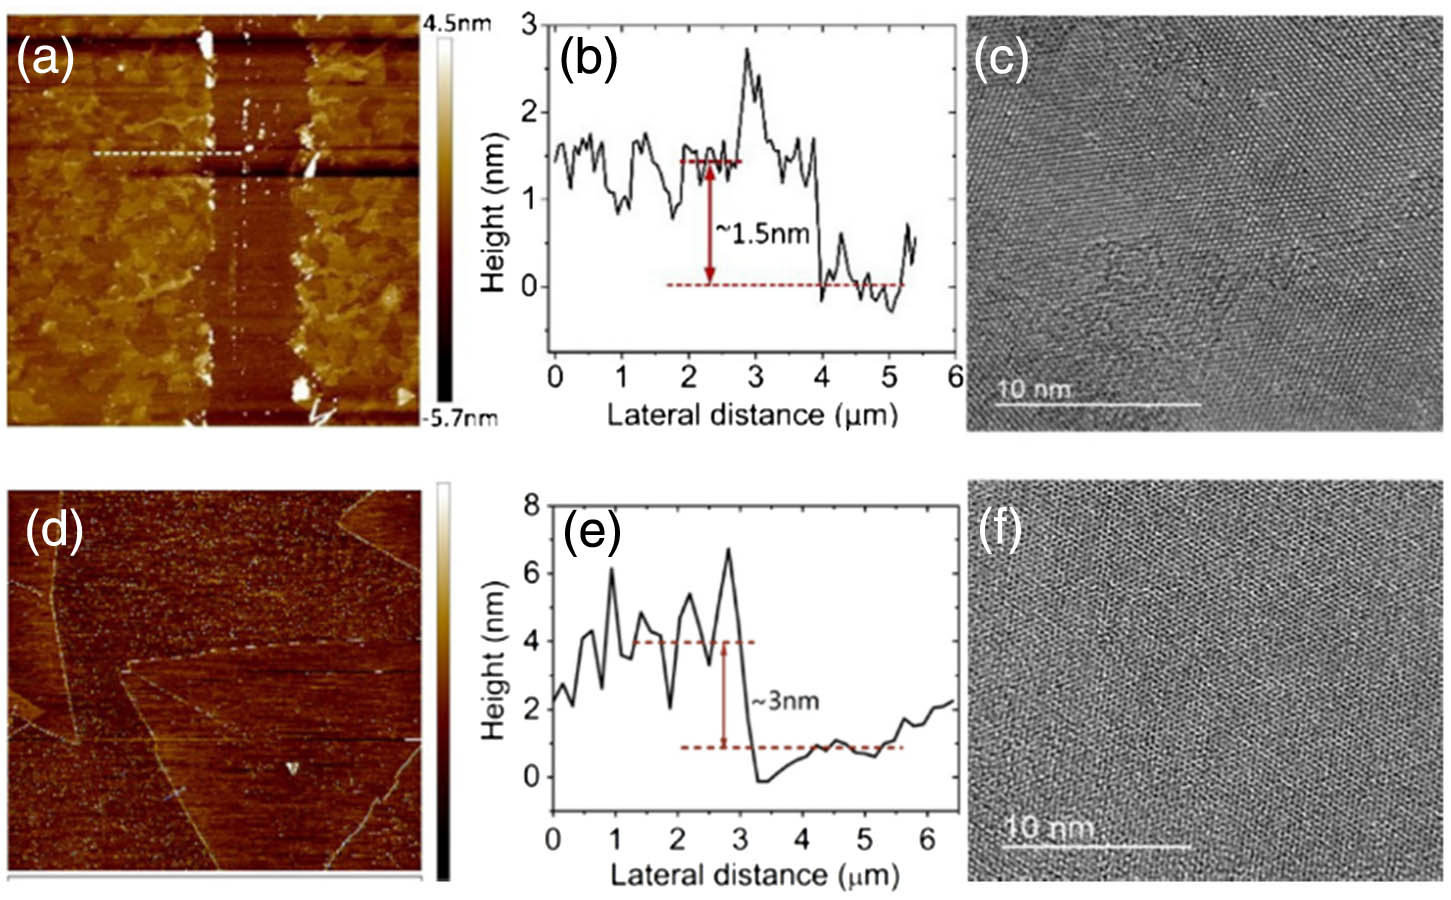 (a) AFM overview of WSe2. (b) Function curve of height and lateral distance of the WSe2 SA. (c) TEM detail image of the WSe2 SA at scale bar length of 10 nm. (d) AFM image of MoSe2. (e) Function curve of height and lateral distance of the MoSe2 SA. (f) TEM detail image of the MoSe2 SA at high resolution of 10 nm.